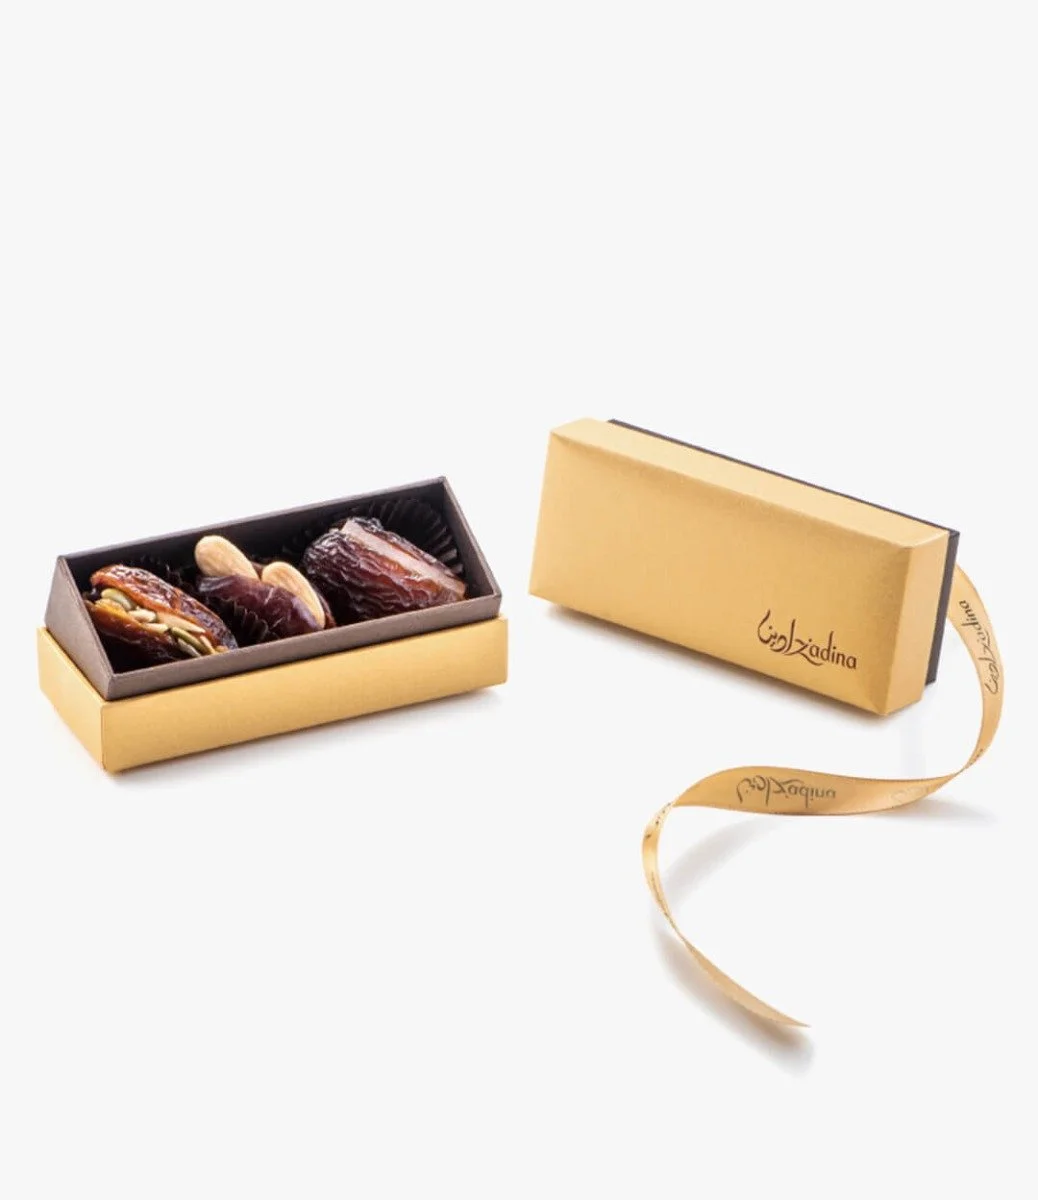 Gold Small Rectangle-3 pieces of Dates By Zadina